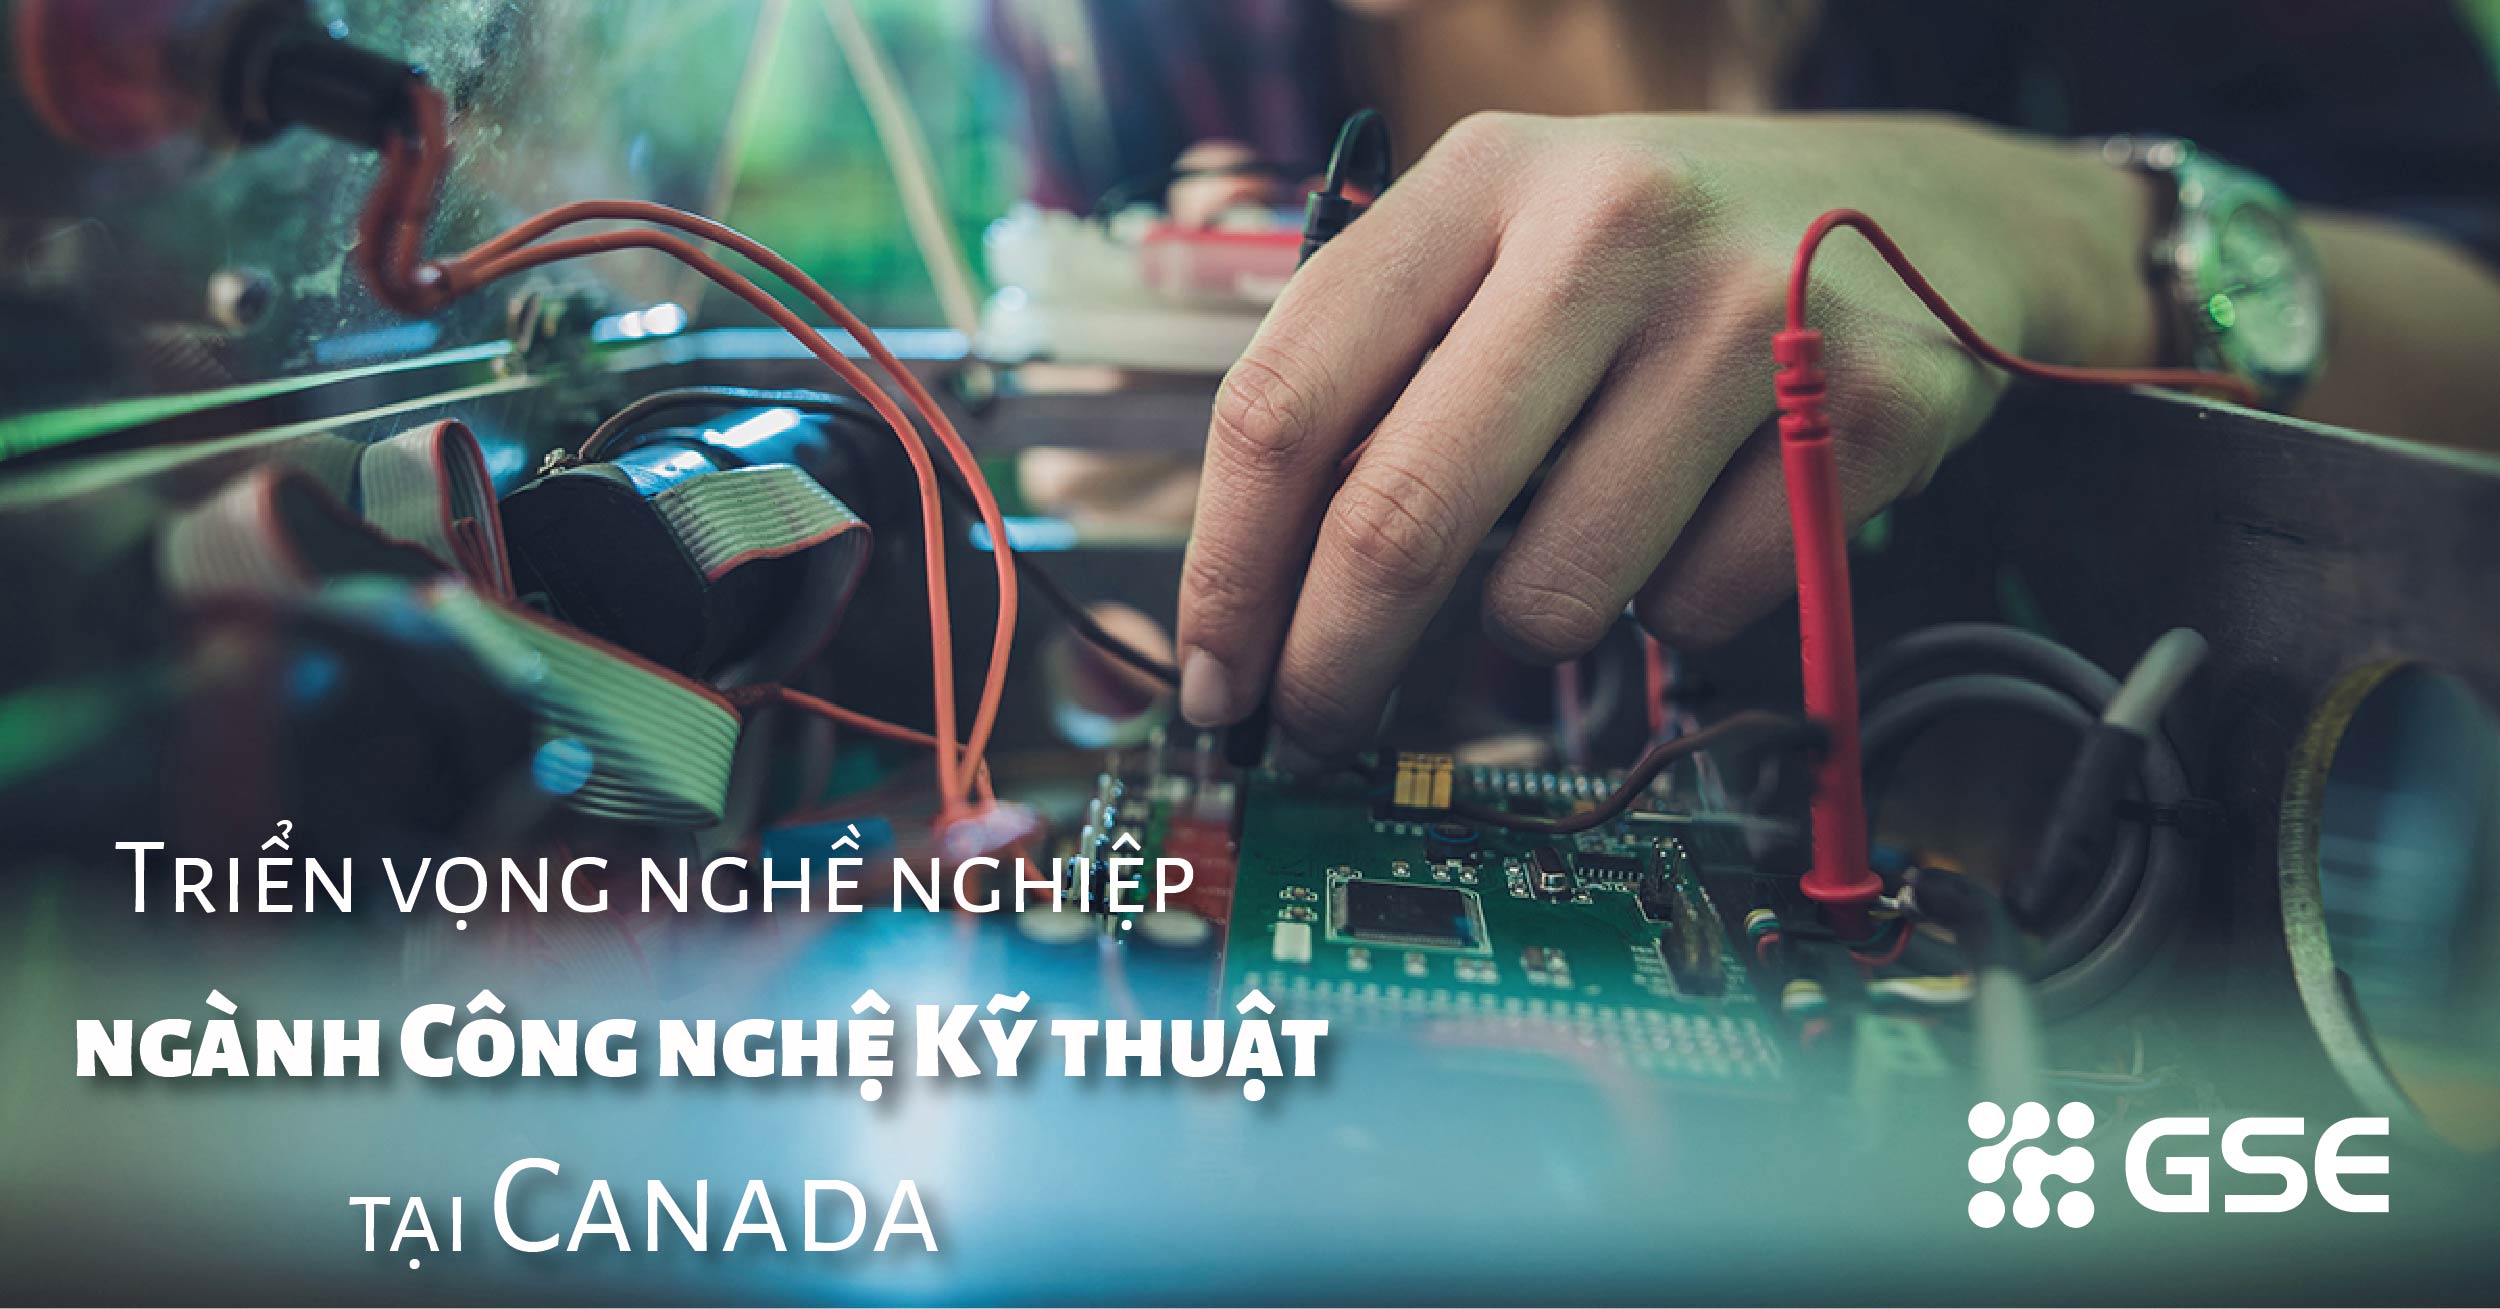 nghe cong nghe ky thuat canada 04